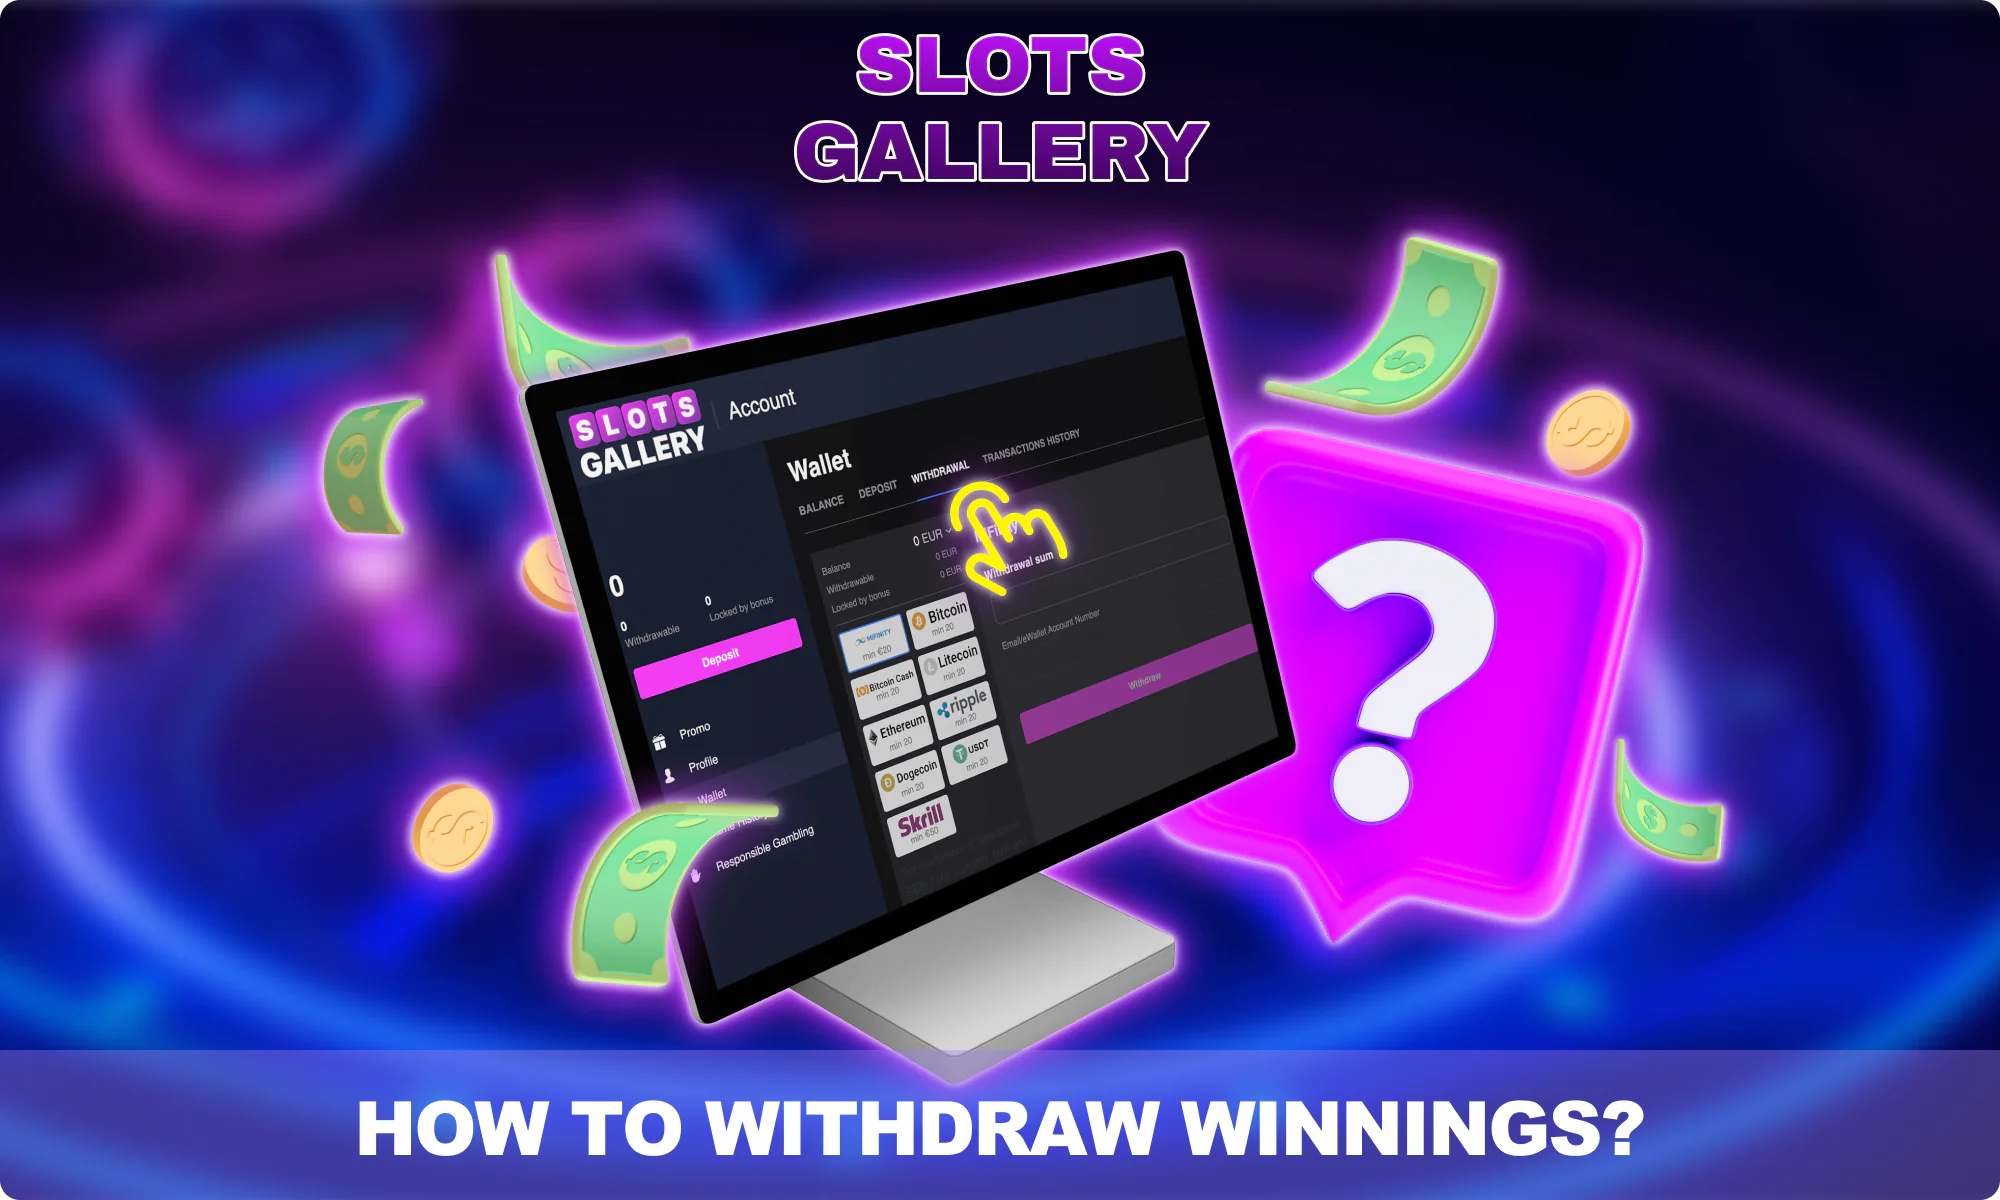 How players from New Zealand can withdraw money from Slots Gallery